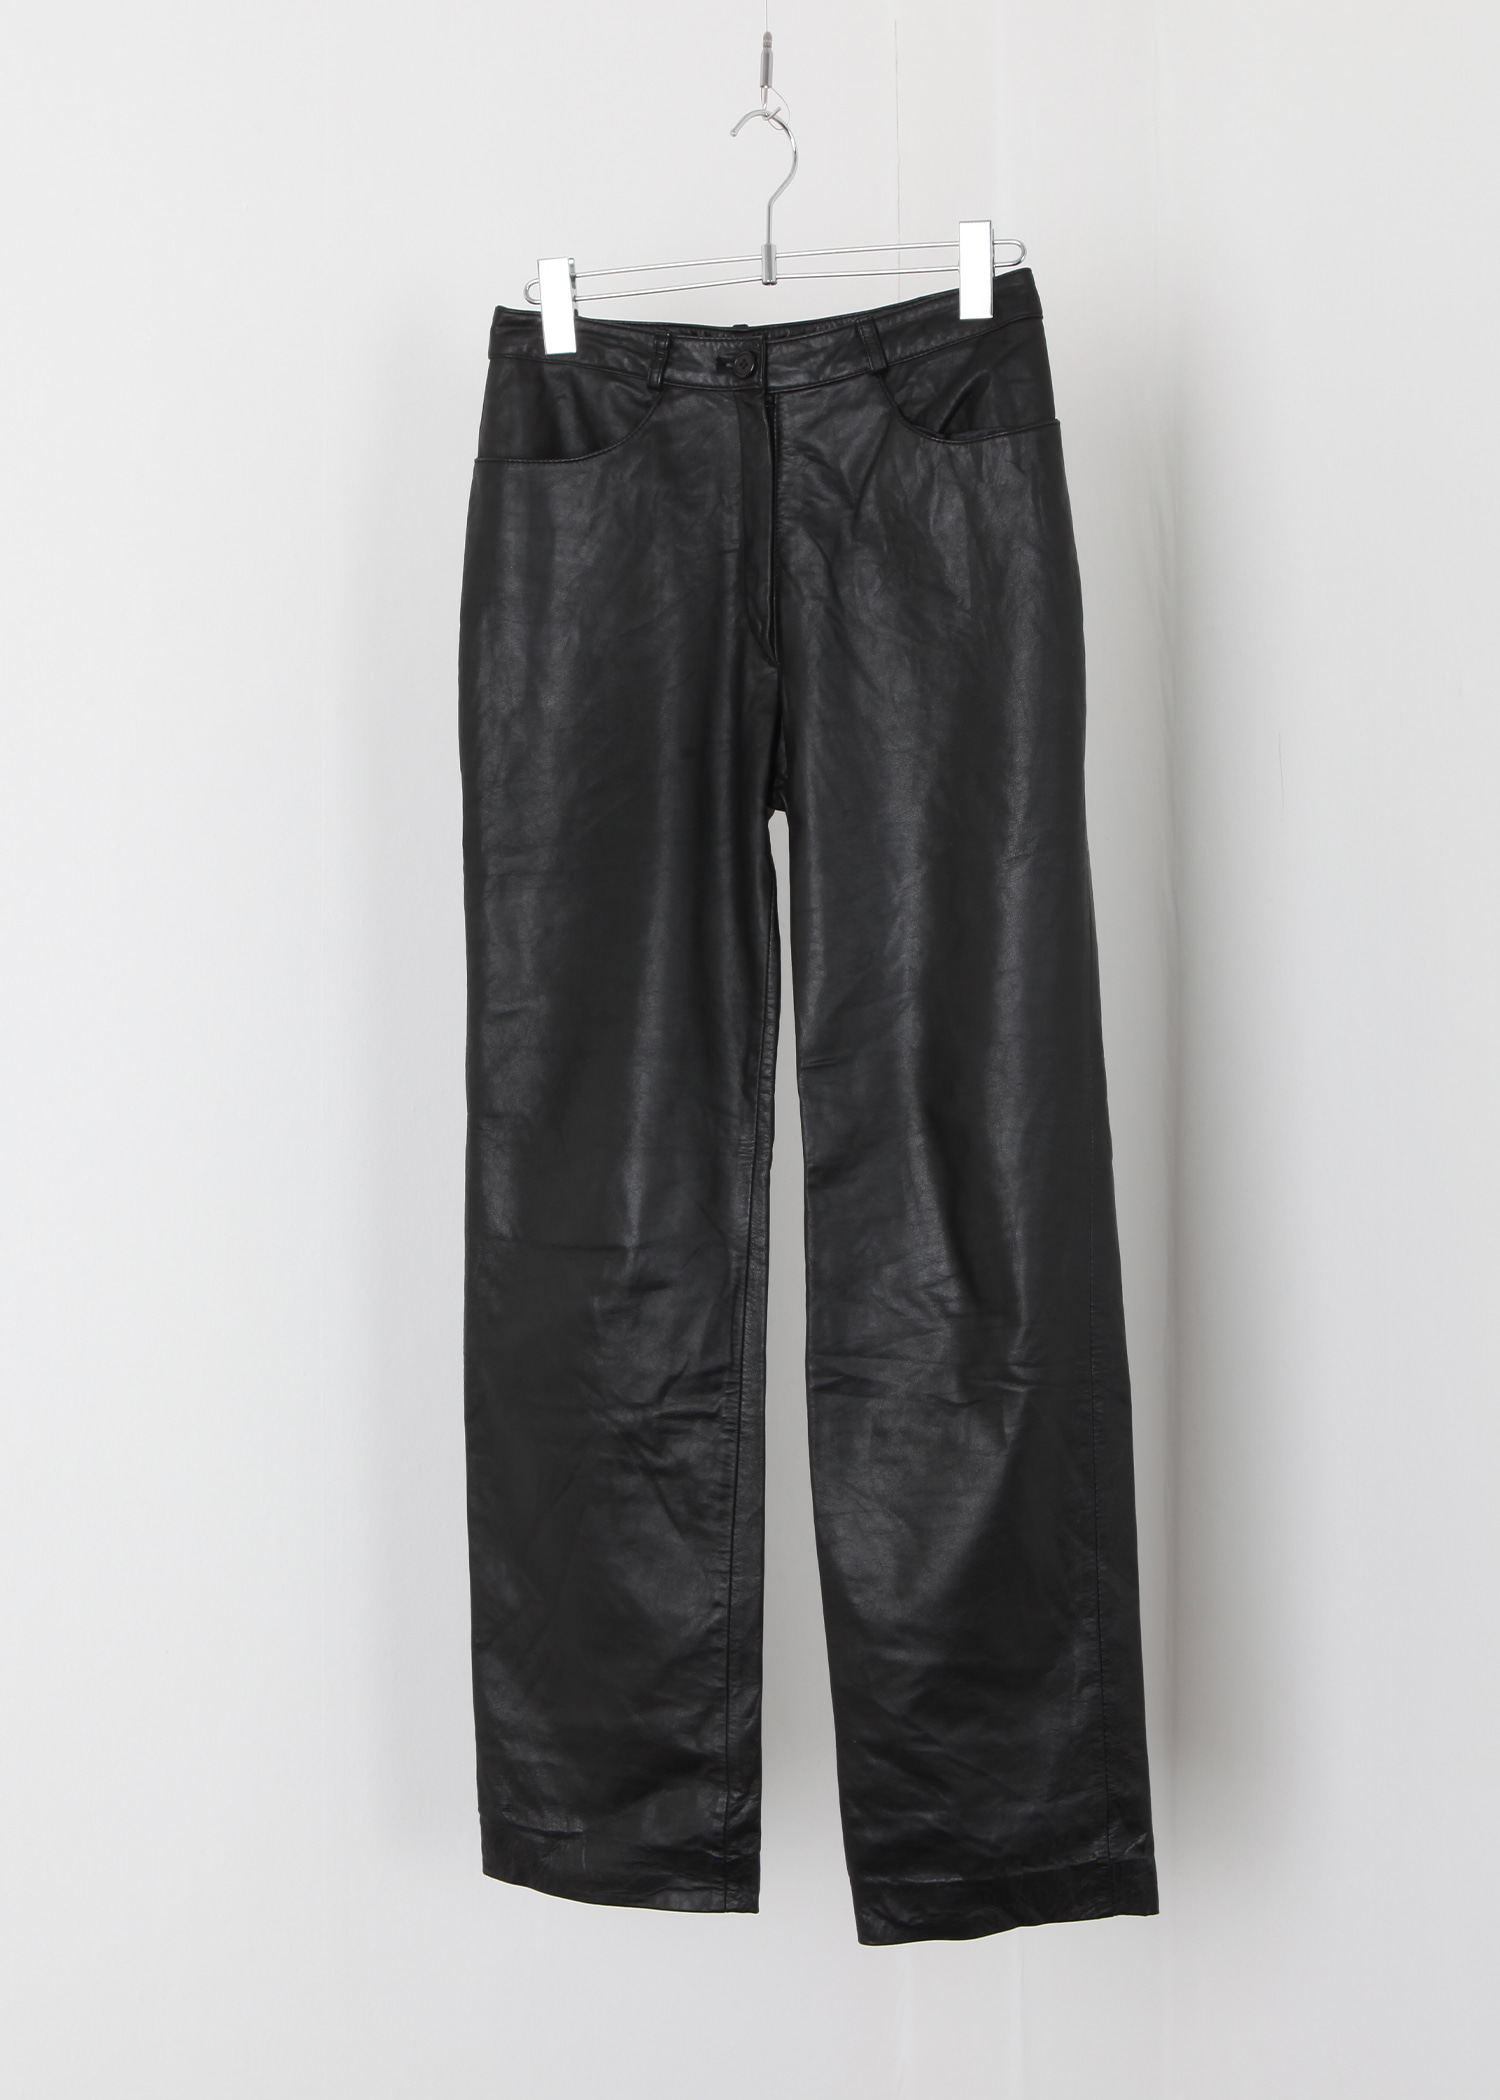 American nonstop leather pants